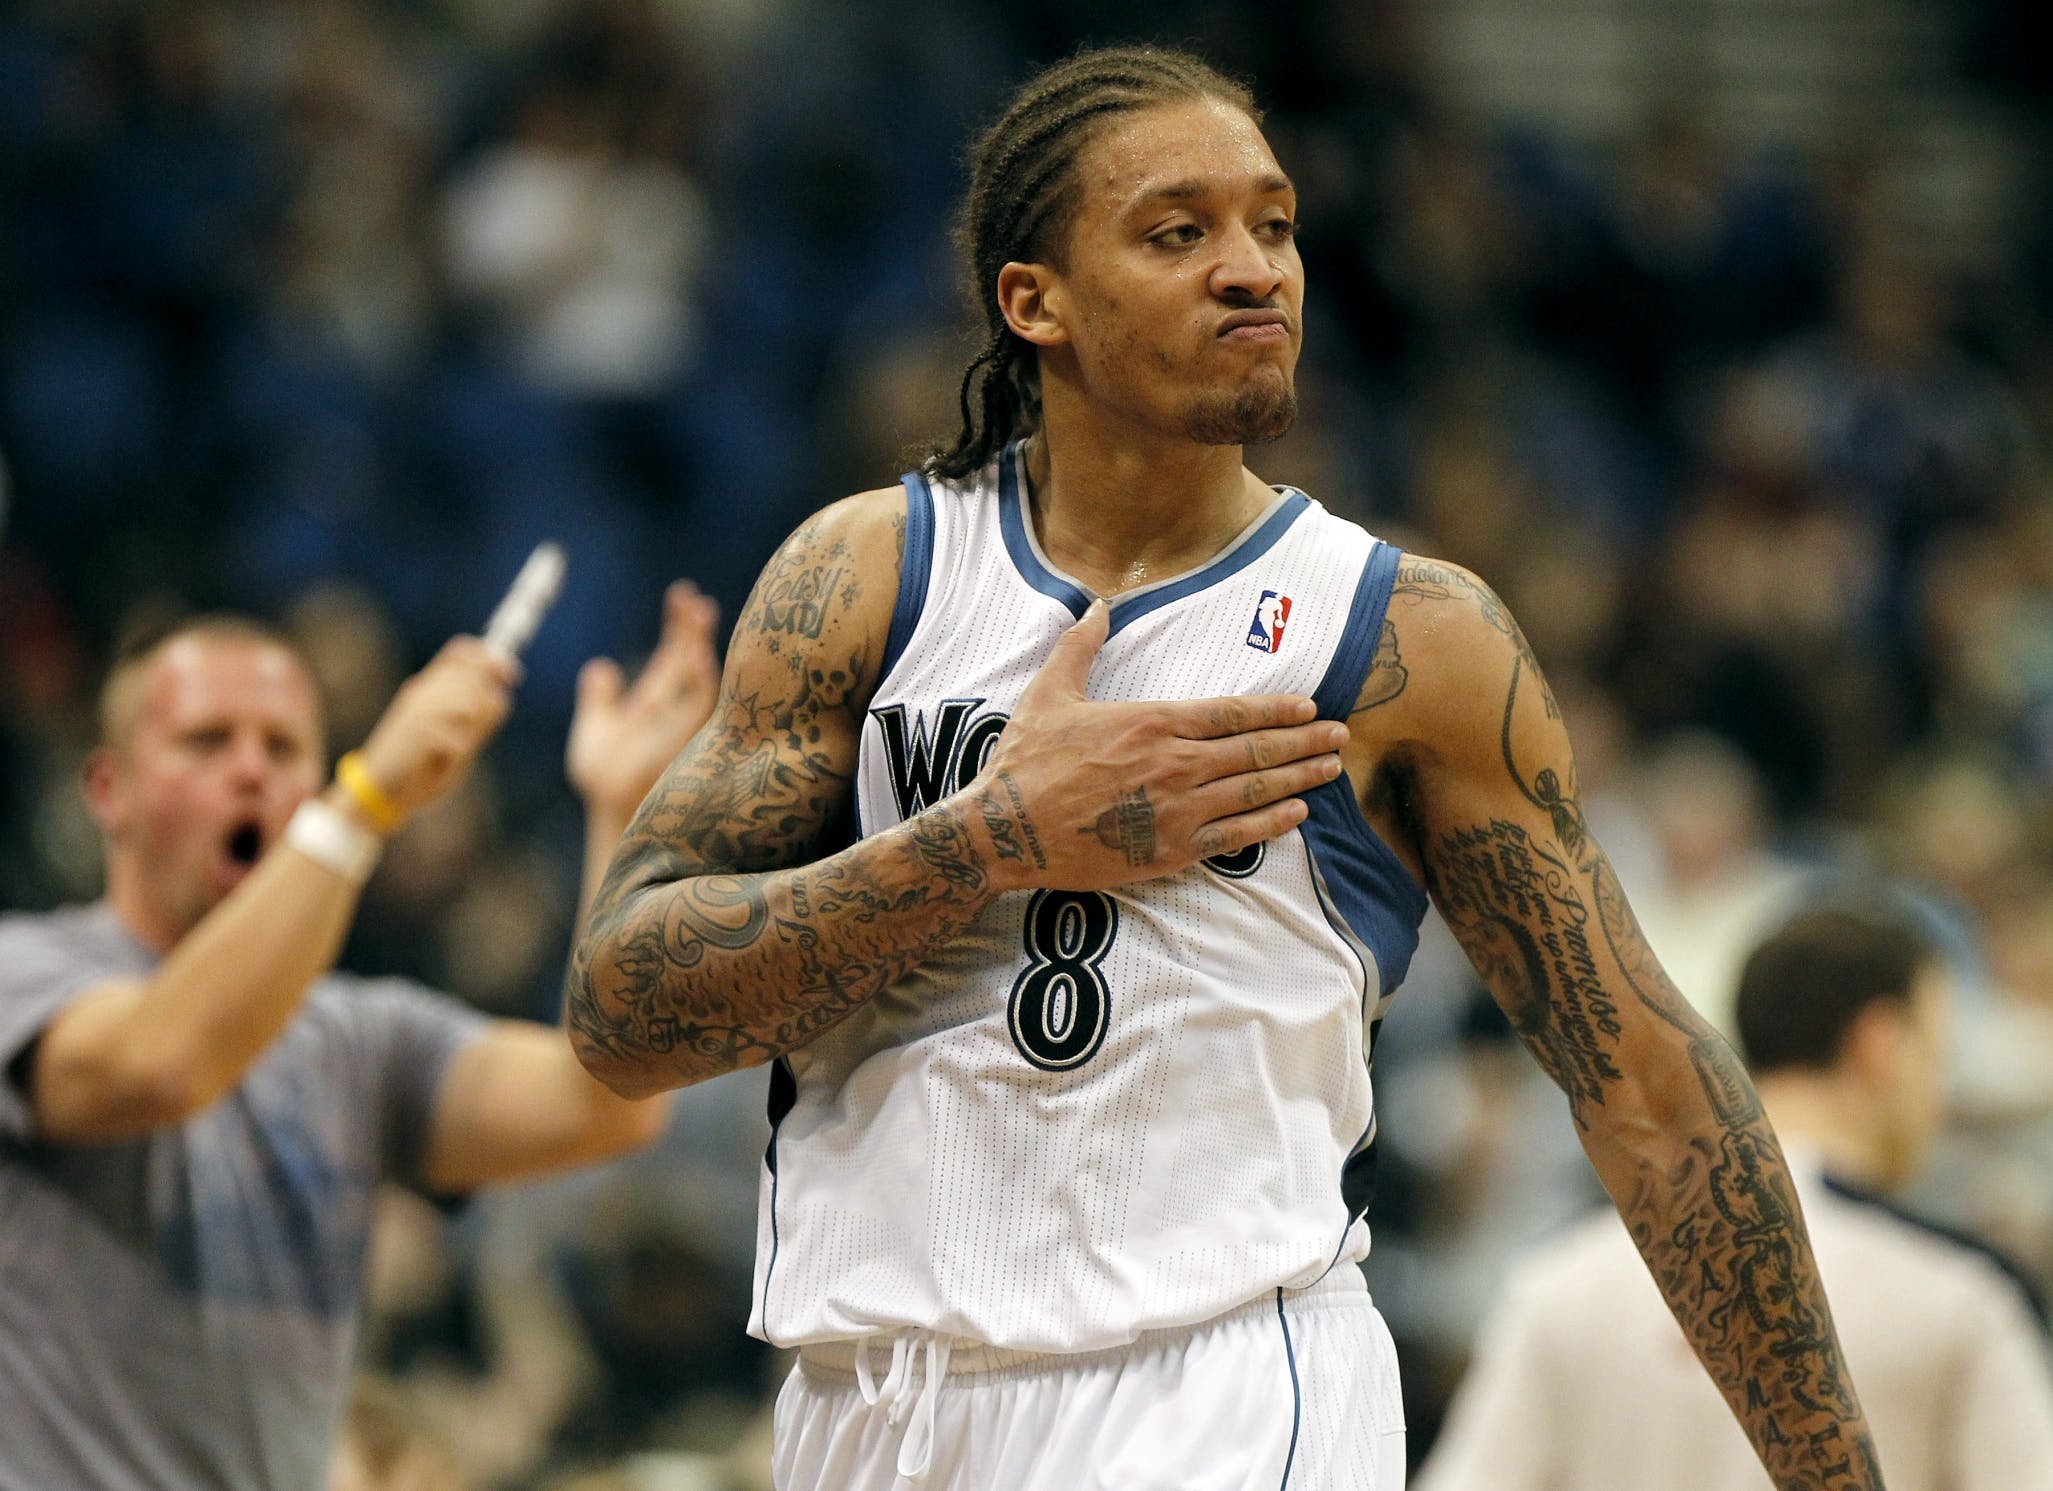 Beasley pursues an image makeover while filling a basketball gap ...